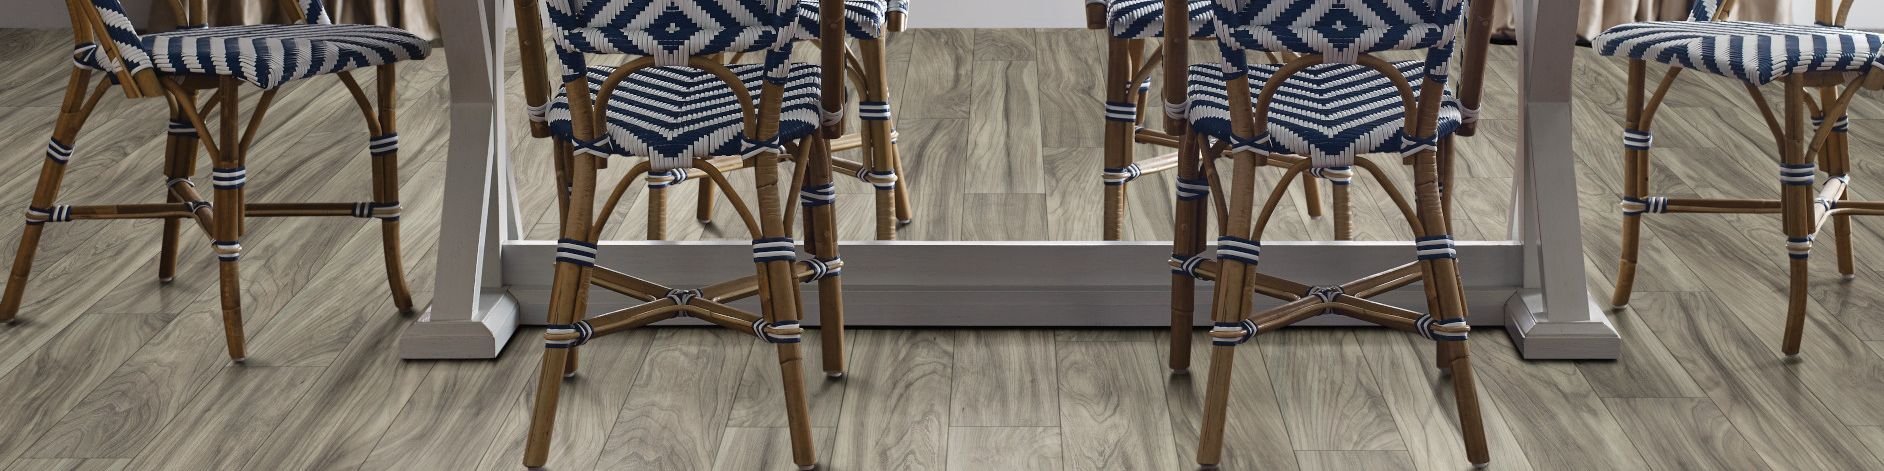 woven dining chairs around a dining table - Mac's Custom Flooring